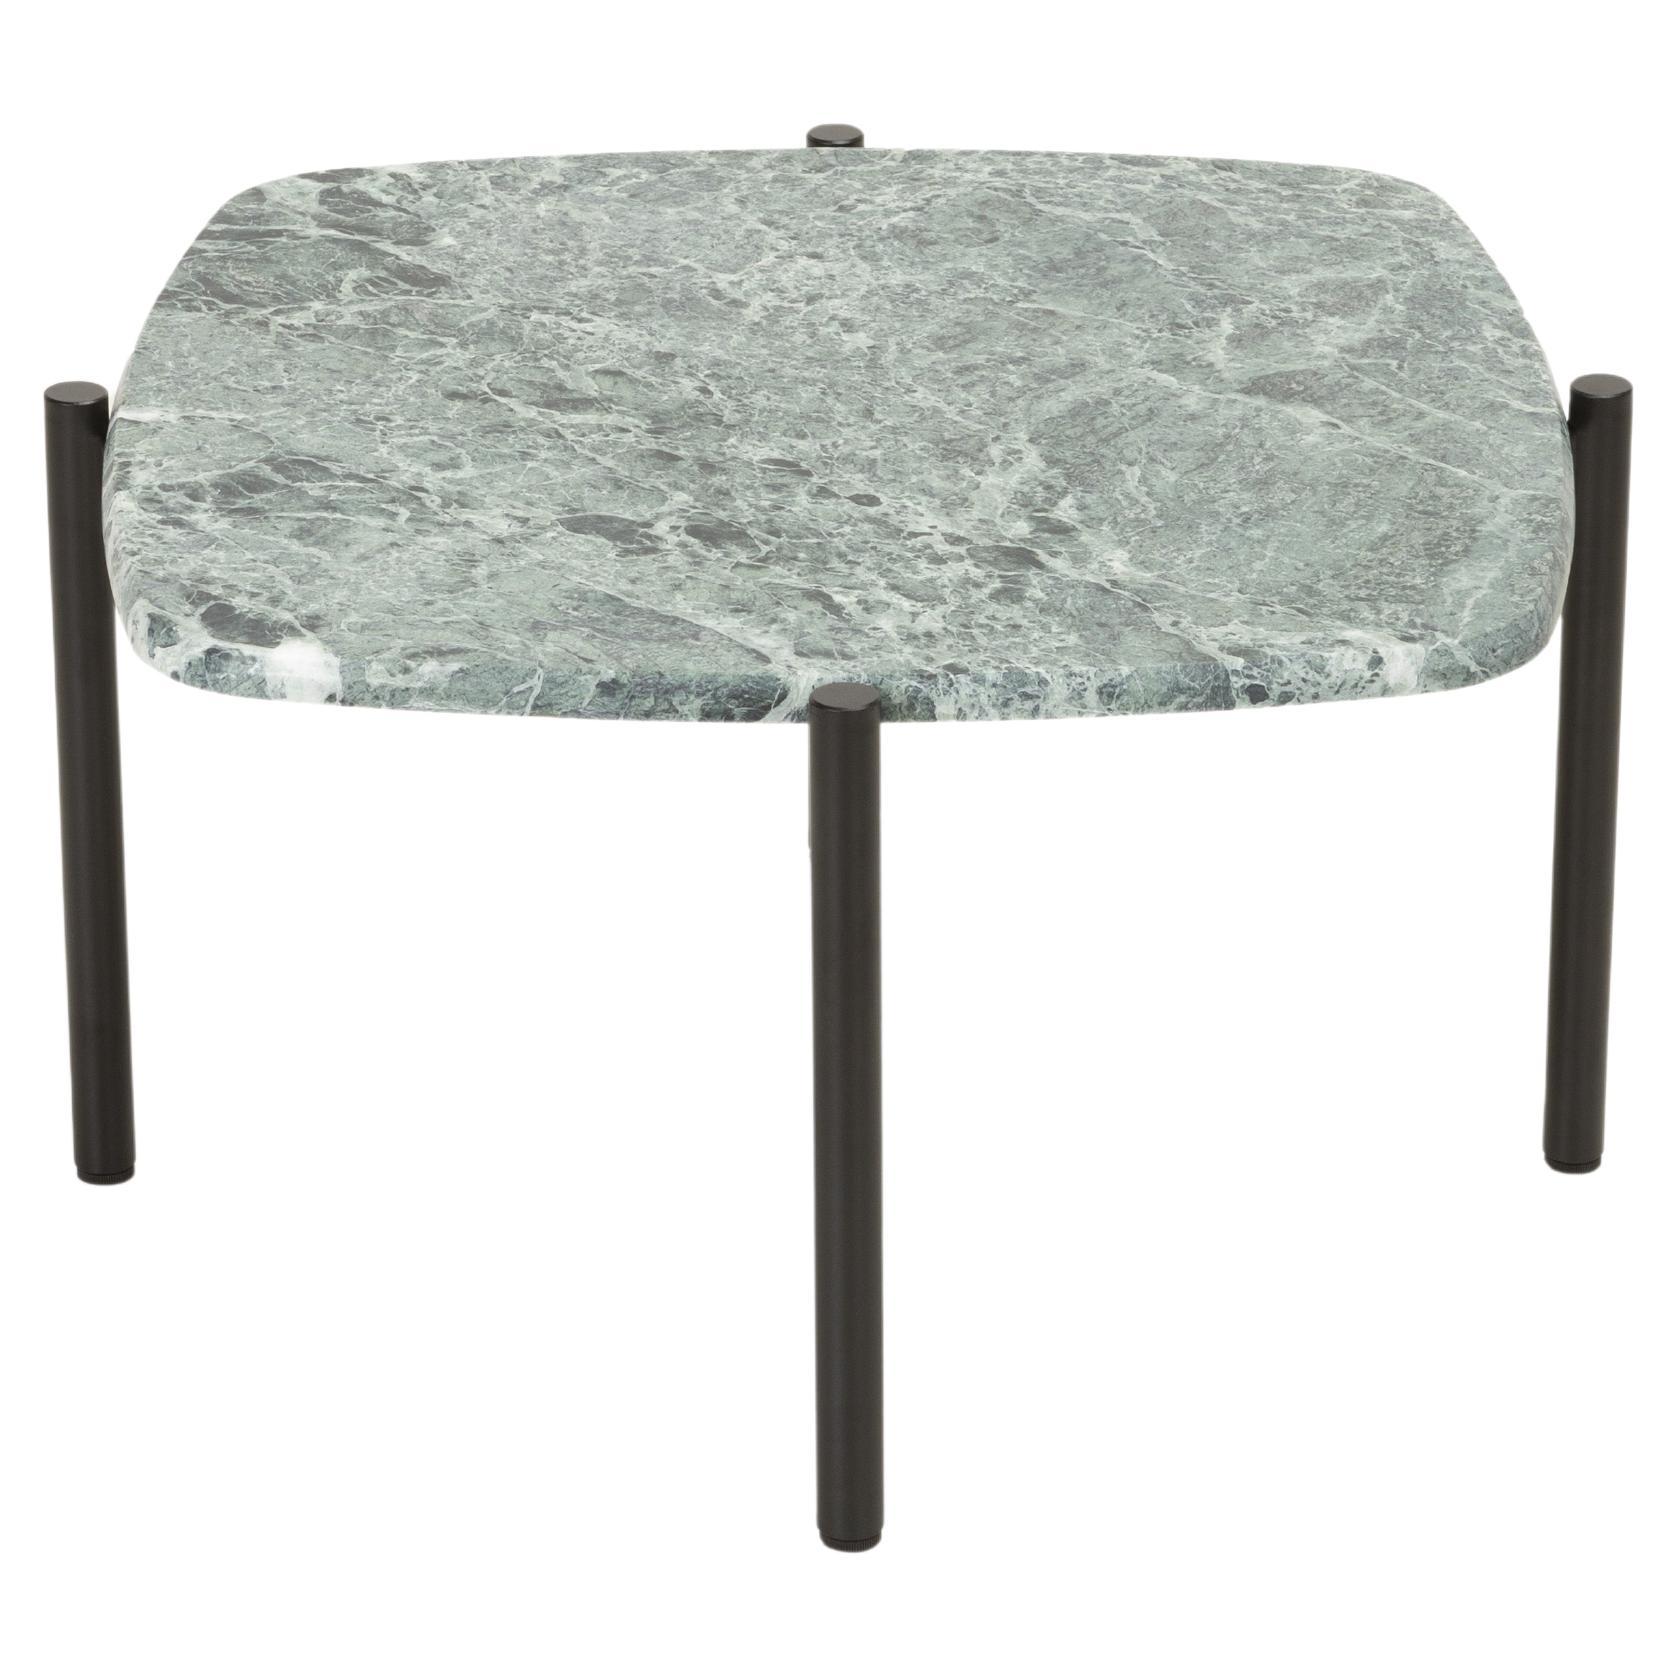 21st Century Modern Marble Verde Alpi Coffee Table Blade Coffee Made in Italy For Sale